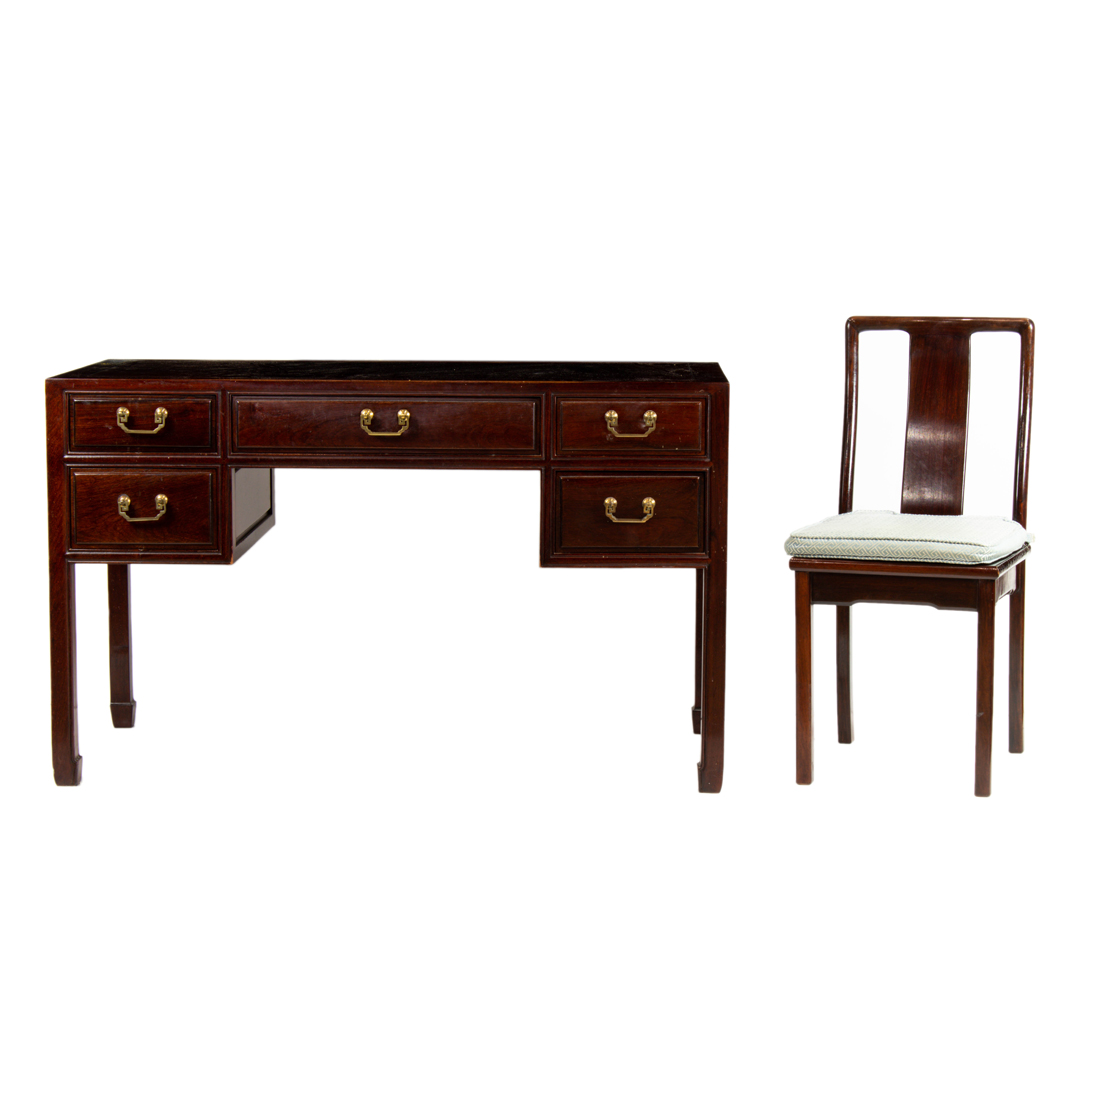 CHINESE STYLE HARDWOOD DESK AND 3a2228